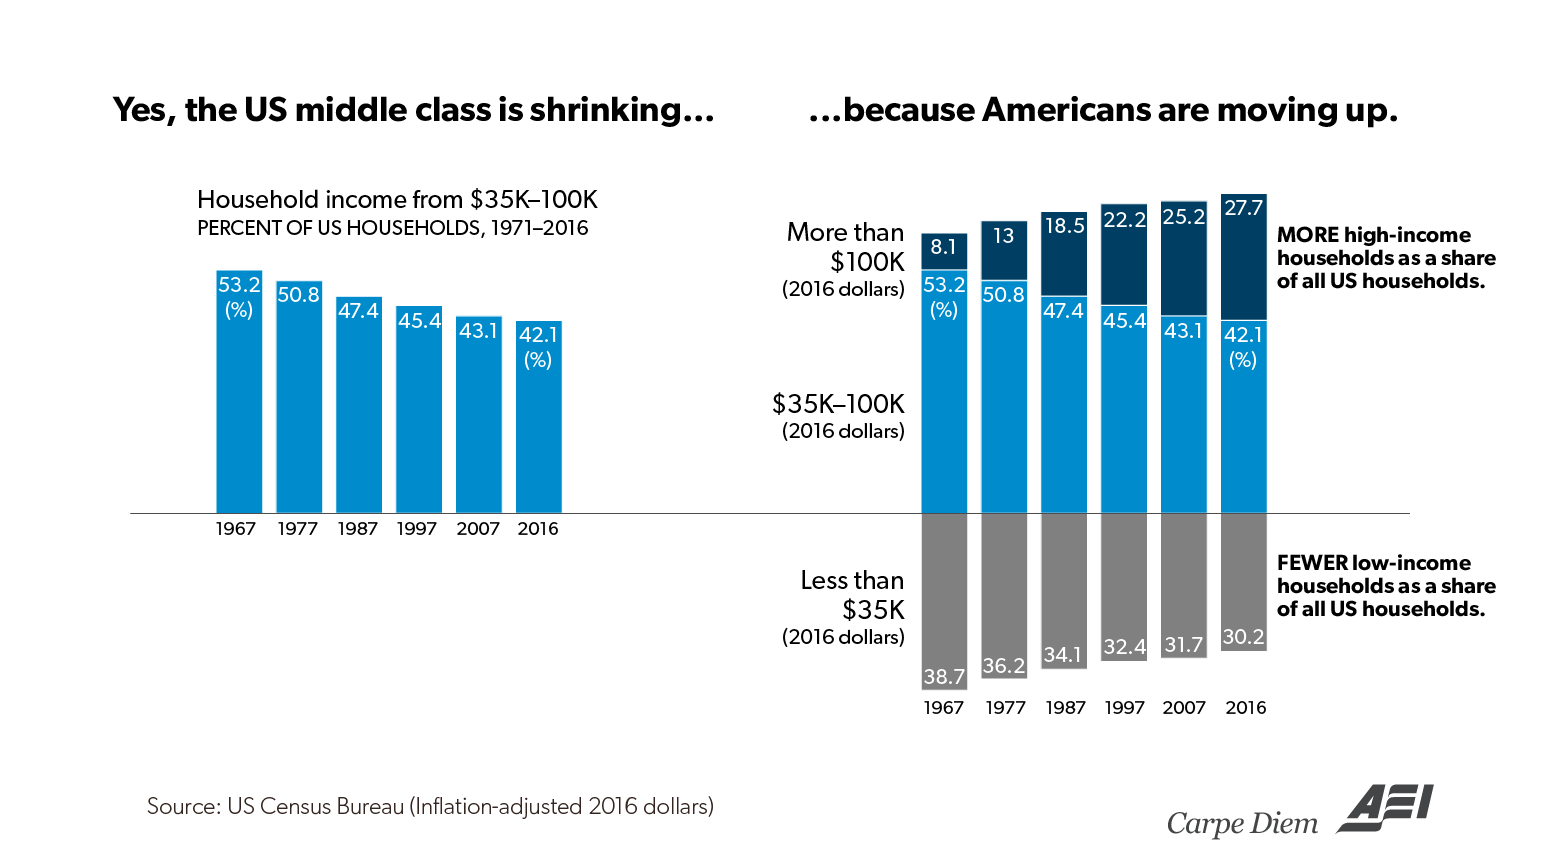 Collective bargaining did not make the middle class rich